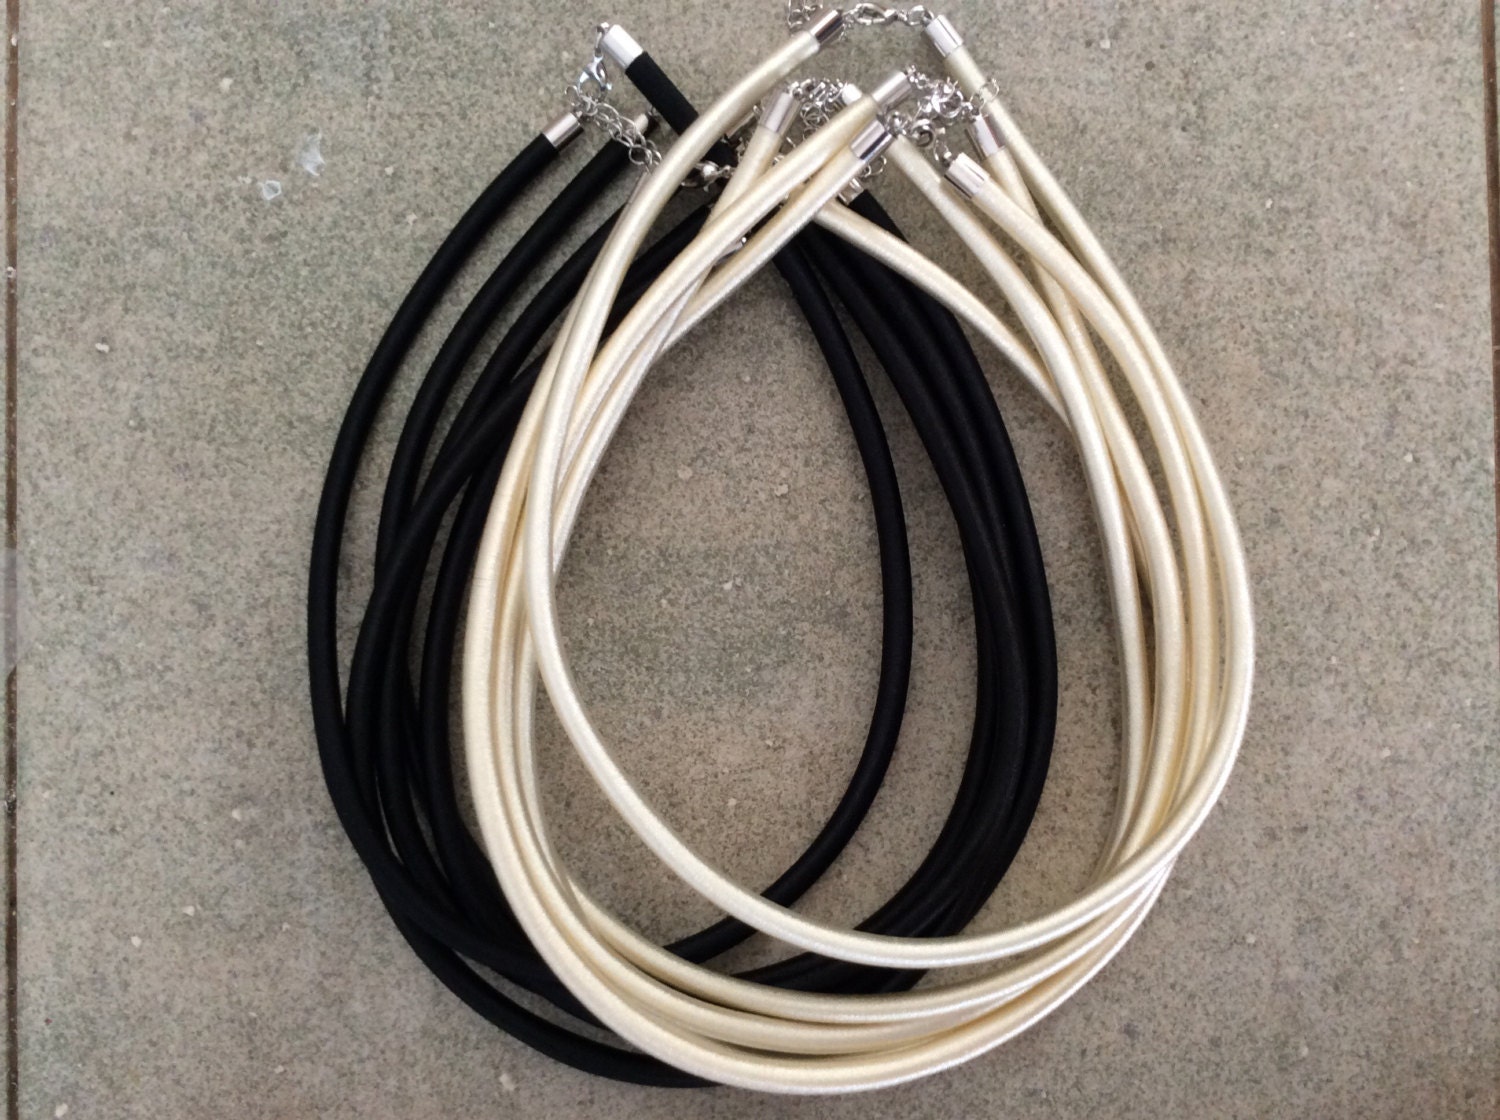 1 pc silk cord necklace black or Ivory choker jewelry supplies